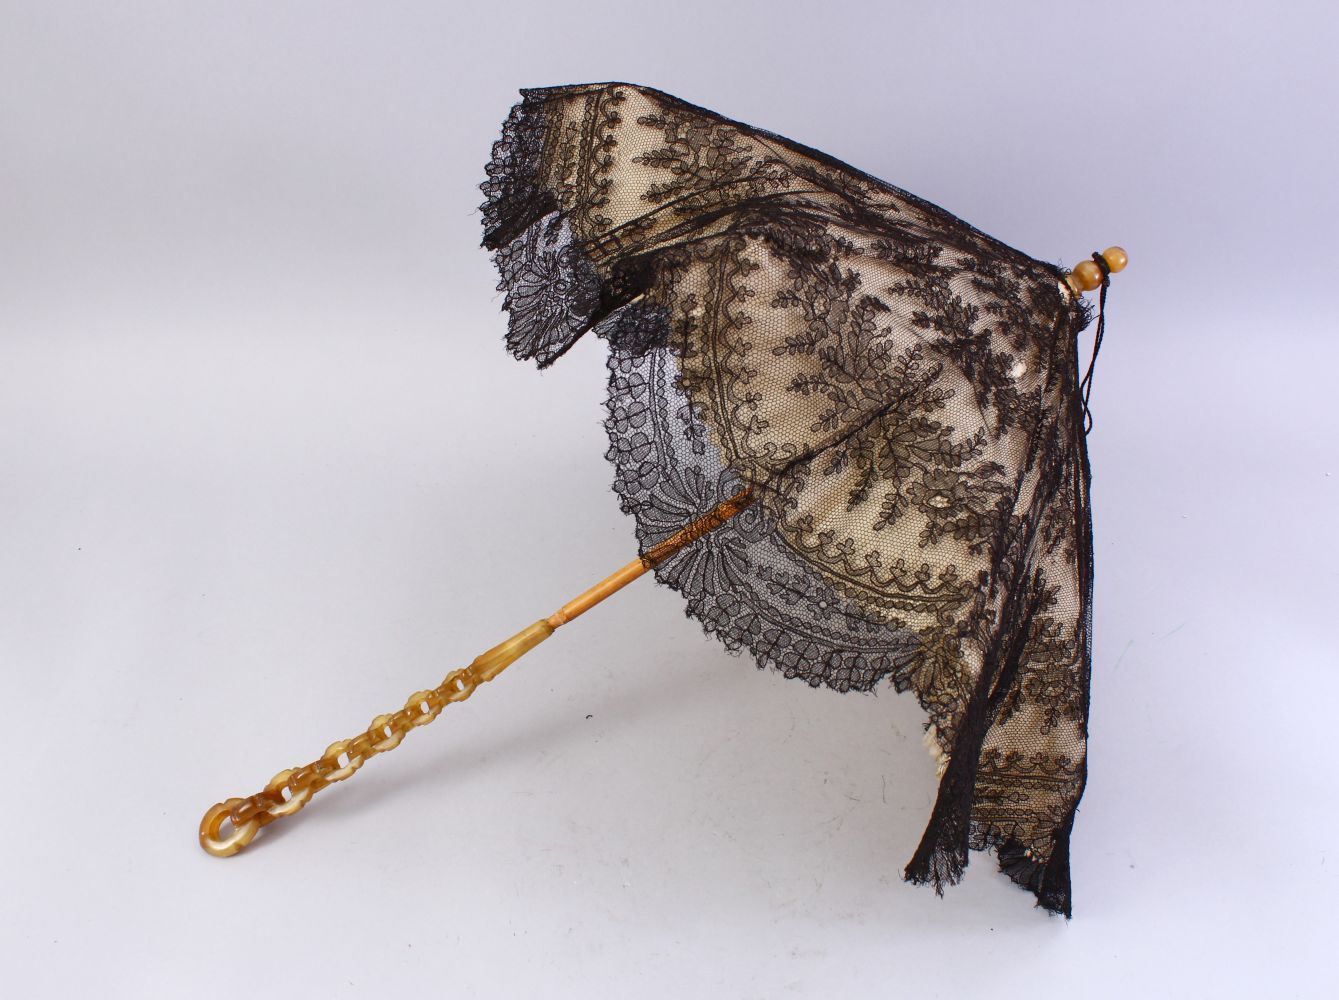 A FINE 19TH CENTURY LADIES PARASOL, with chain-link horn handle - possibly rhino, 60cm long.